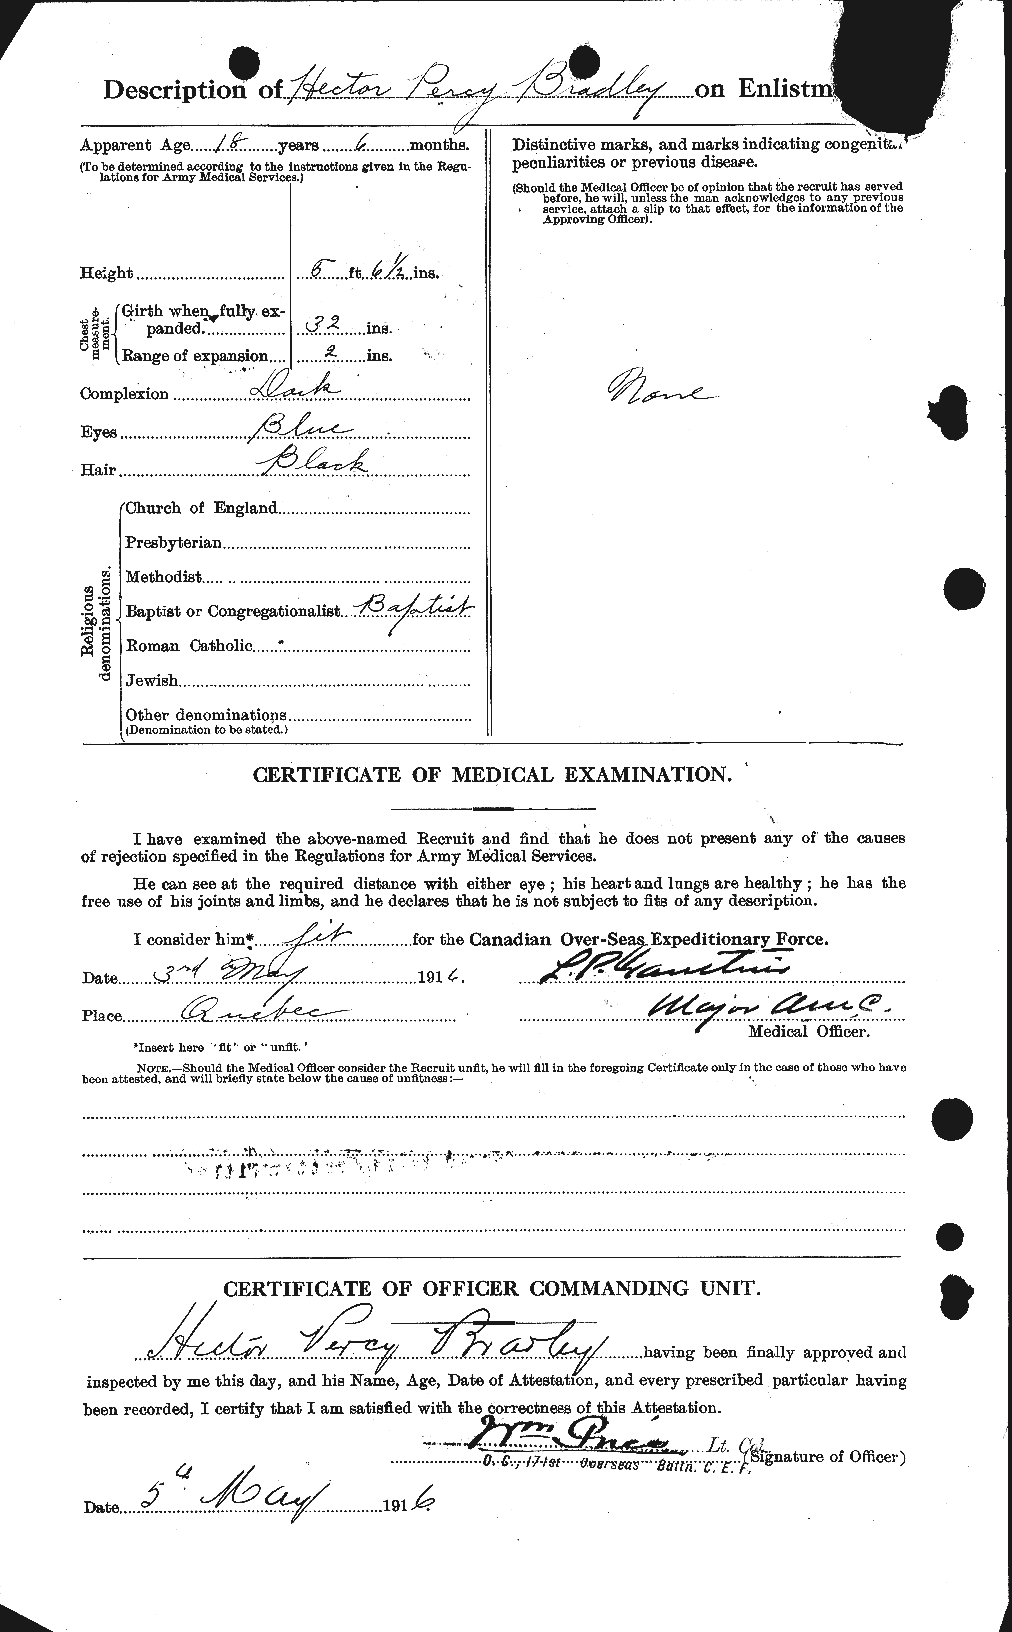 Personnel Records of the First World War - CEF 258426b